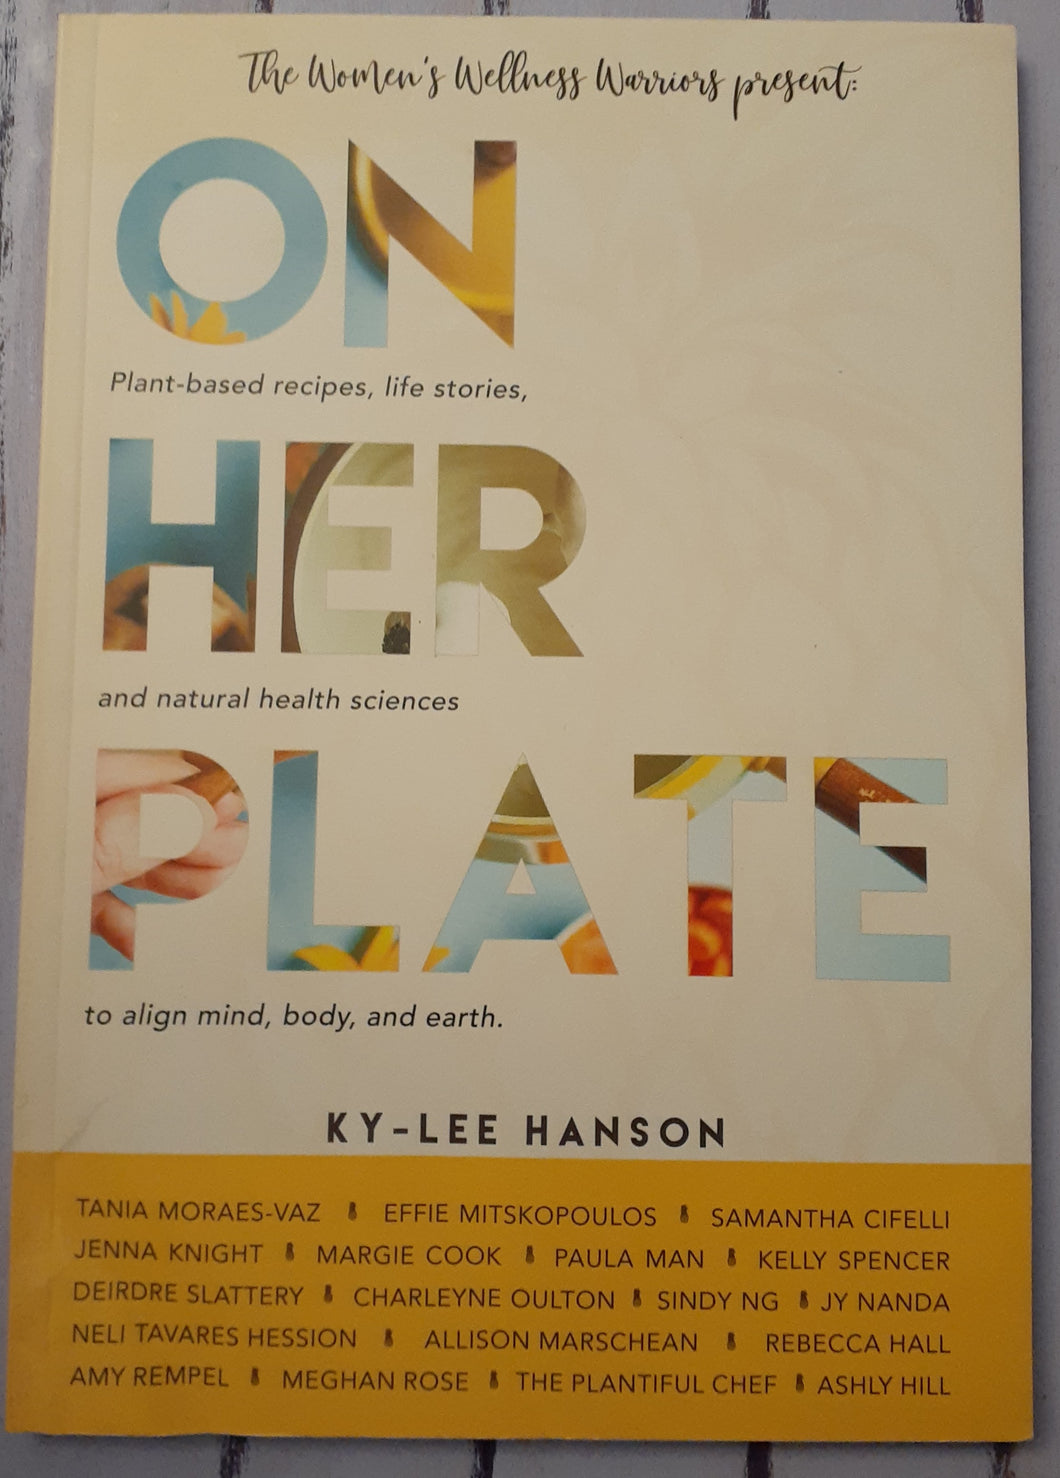 On Her Plate: Plant-based Recipes, Life Stories, and Natural Health Sciences to Align Mind, Body, and Earth